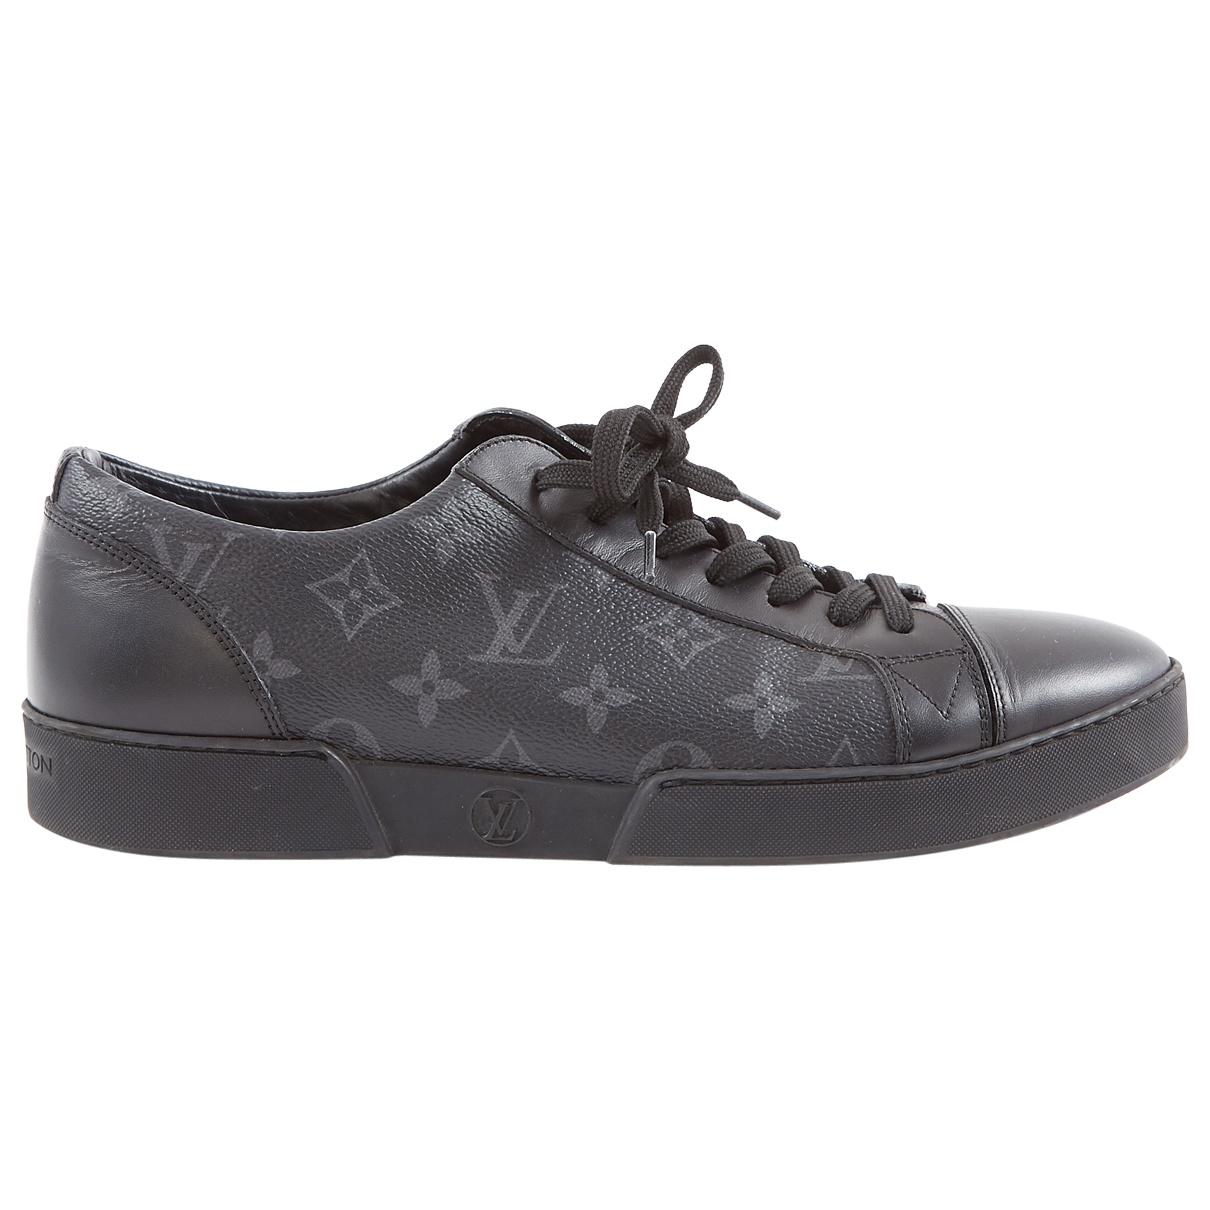 Louis Vuitton Canvas Low Trainers in Black for Men - Lyst